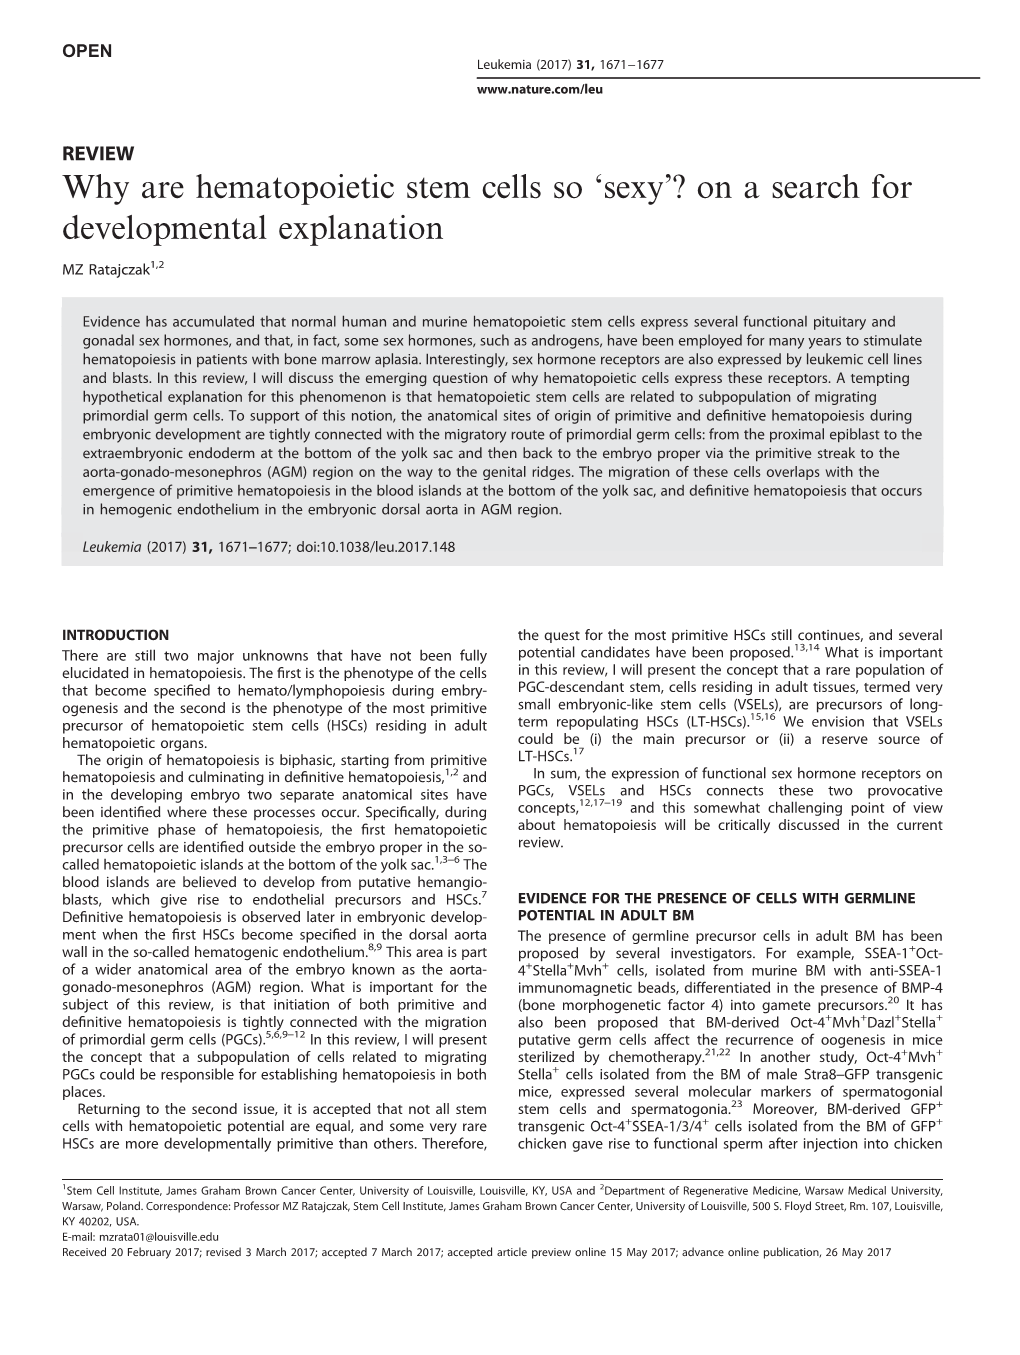 Why Are Hematopoietic Stem Cells So ‘Sexy’? on a Search for Developmental Explanation